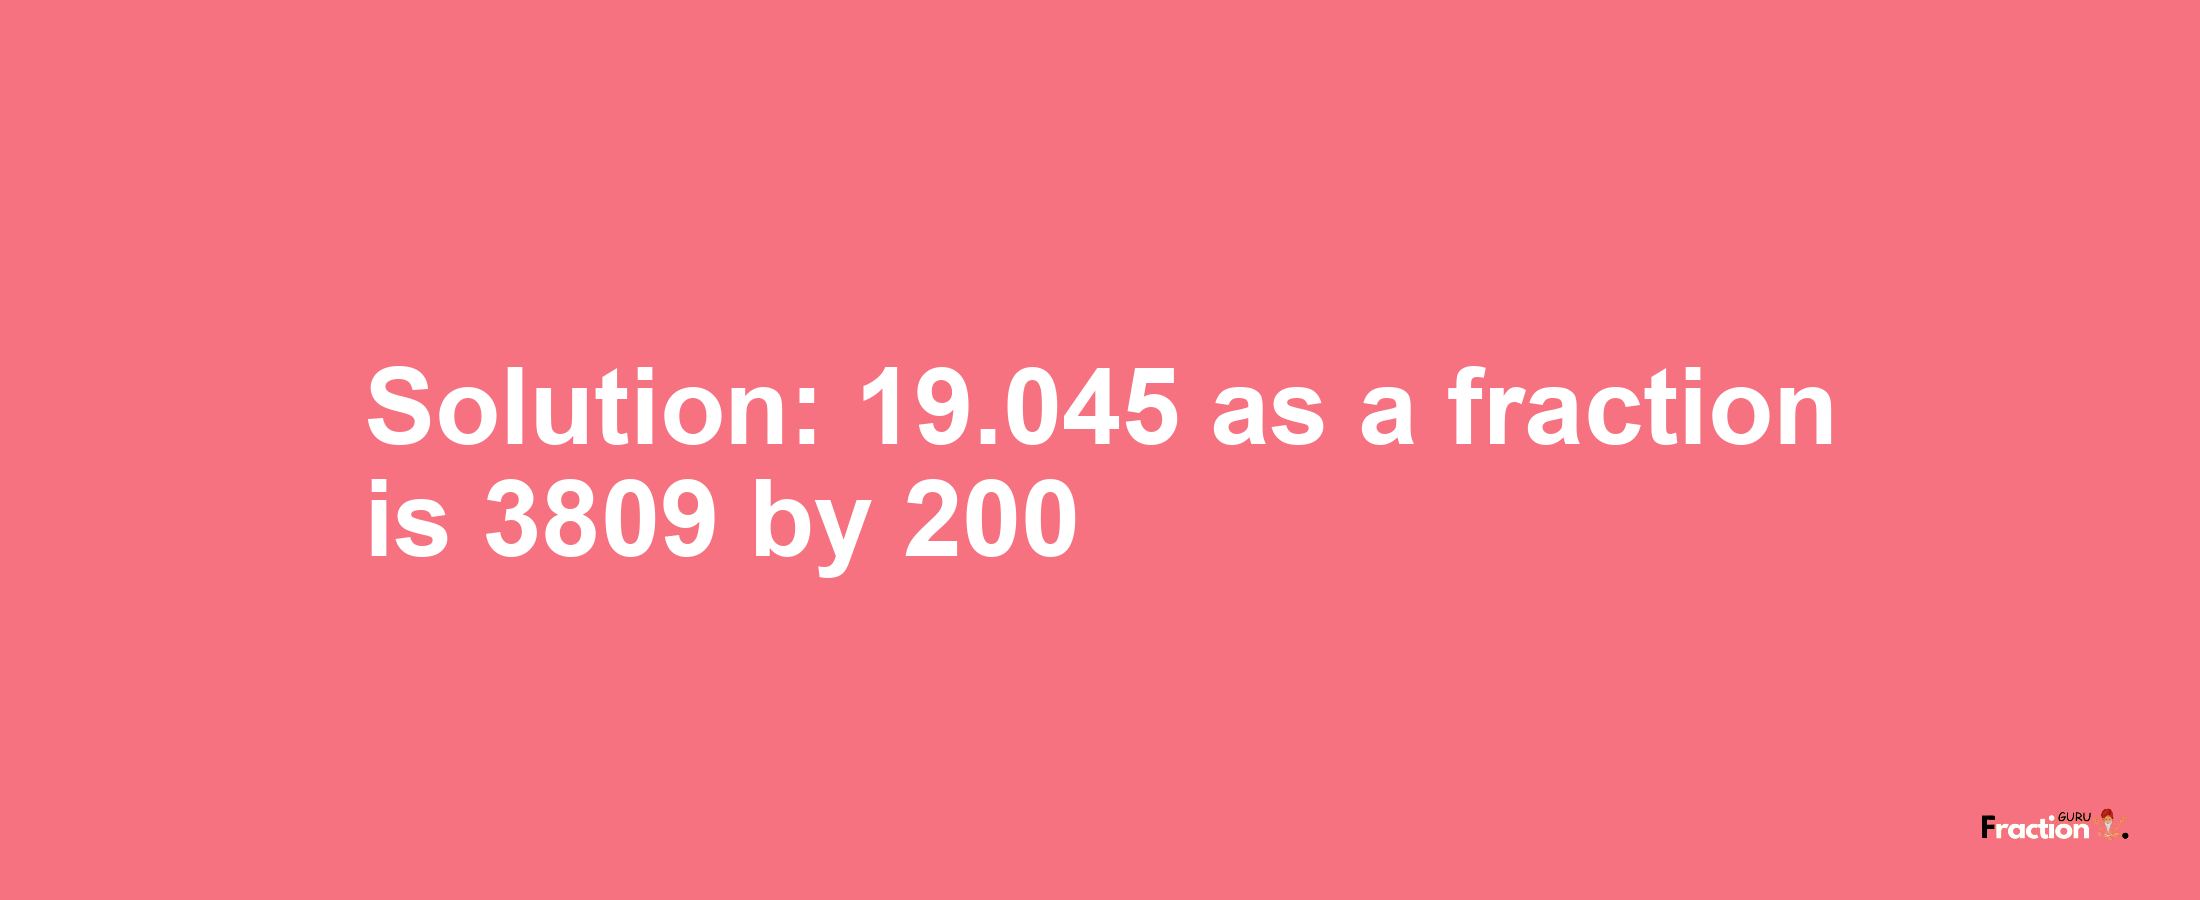 Solution:19.045 as a fraction is 3809/200